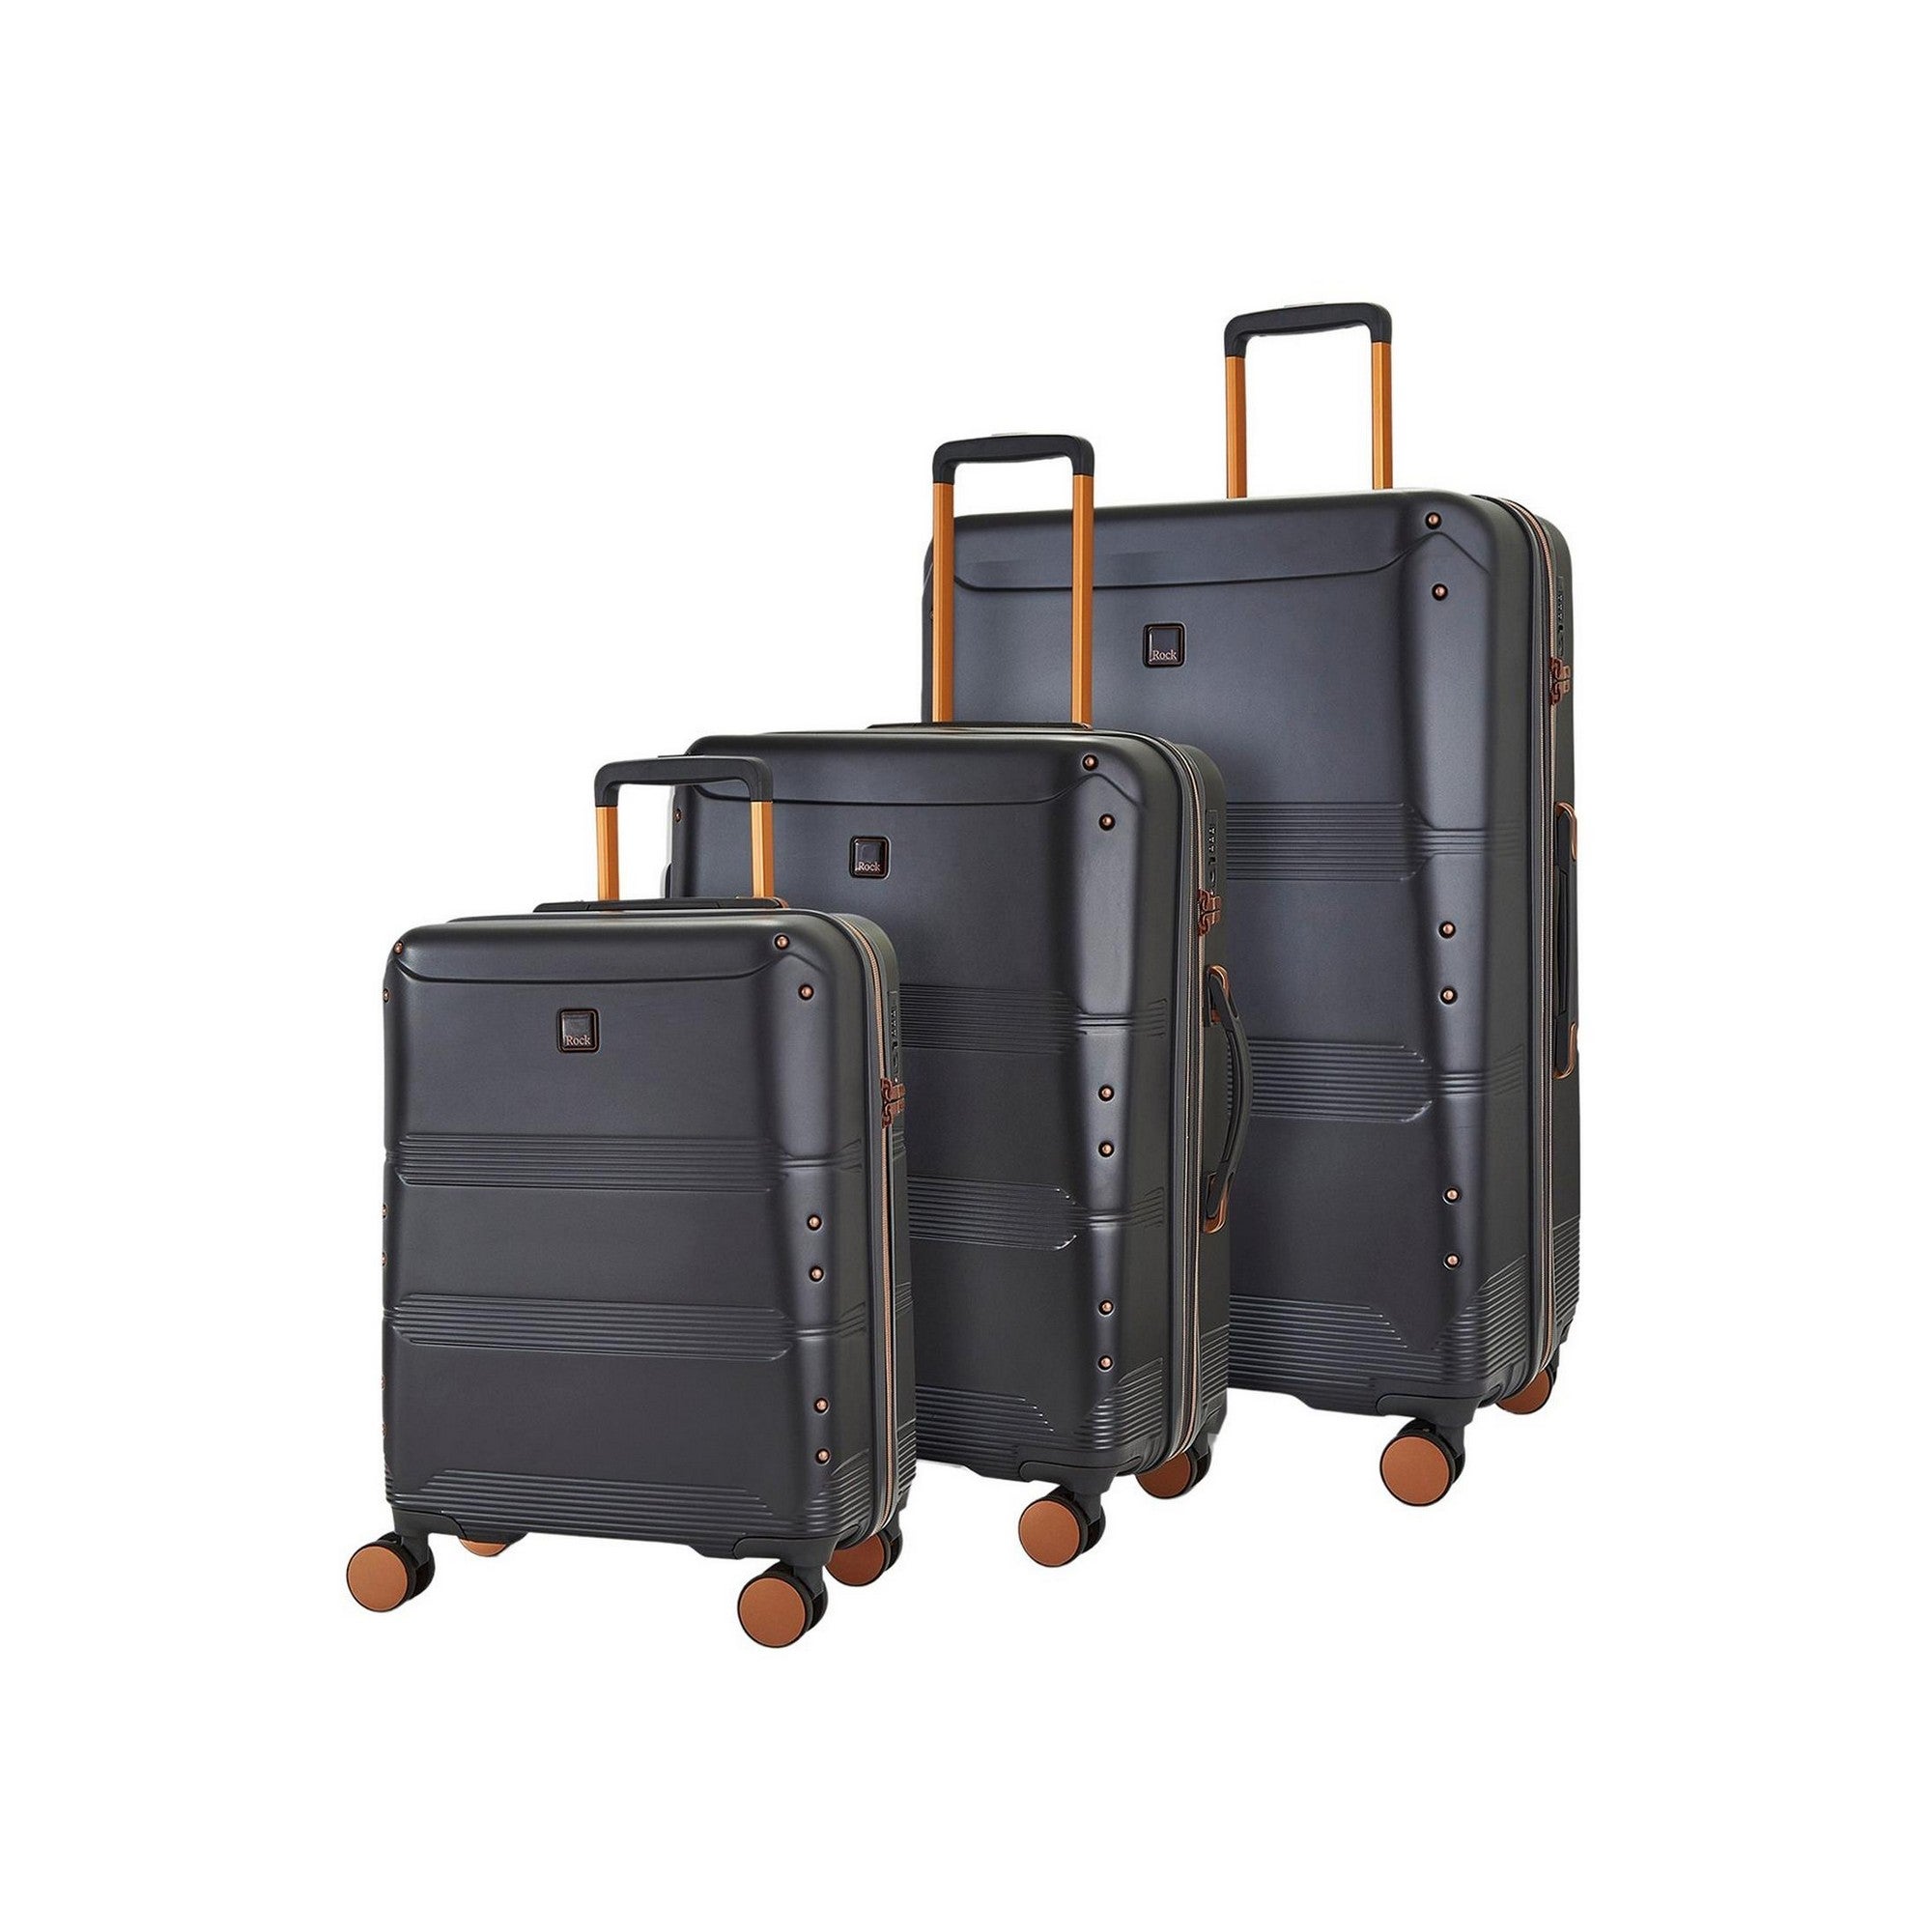 Rock Luggage Mayfair Set of 3 Suitcases Charcoal